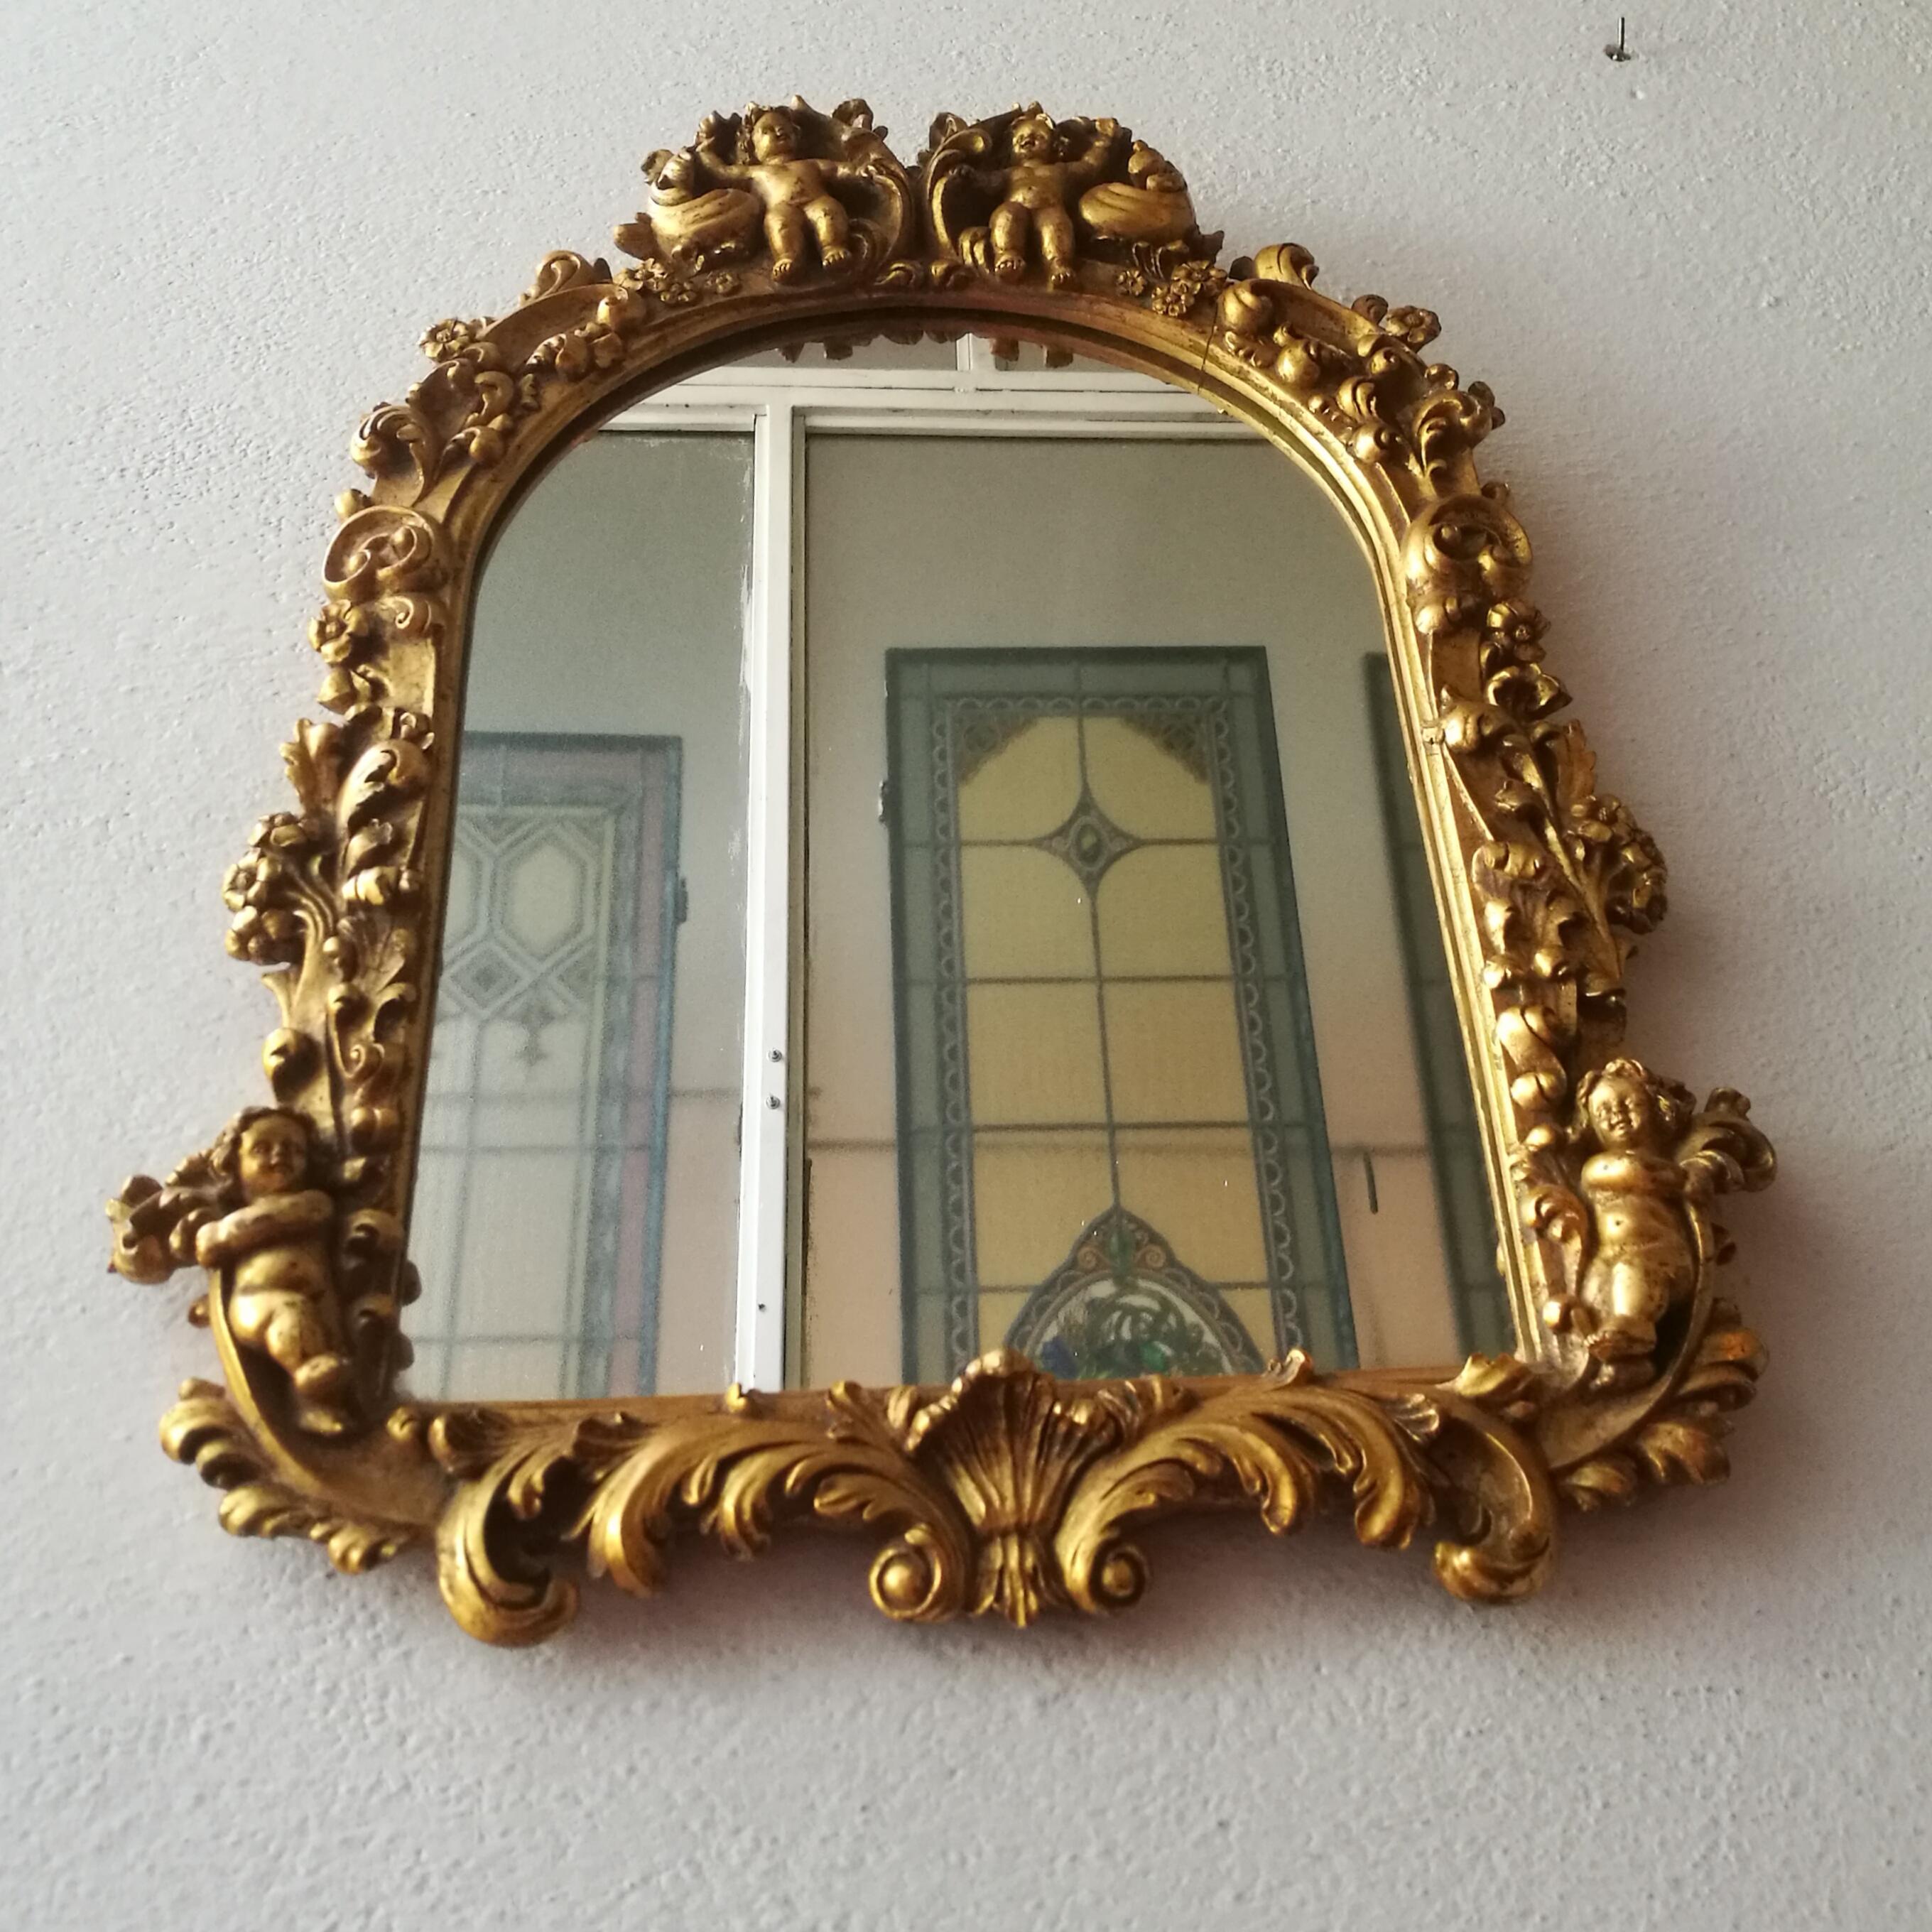 Italian Baroque window mirror with wooden structure, 1950s. Baroque style window mirror, with golden lacquered wood structure.